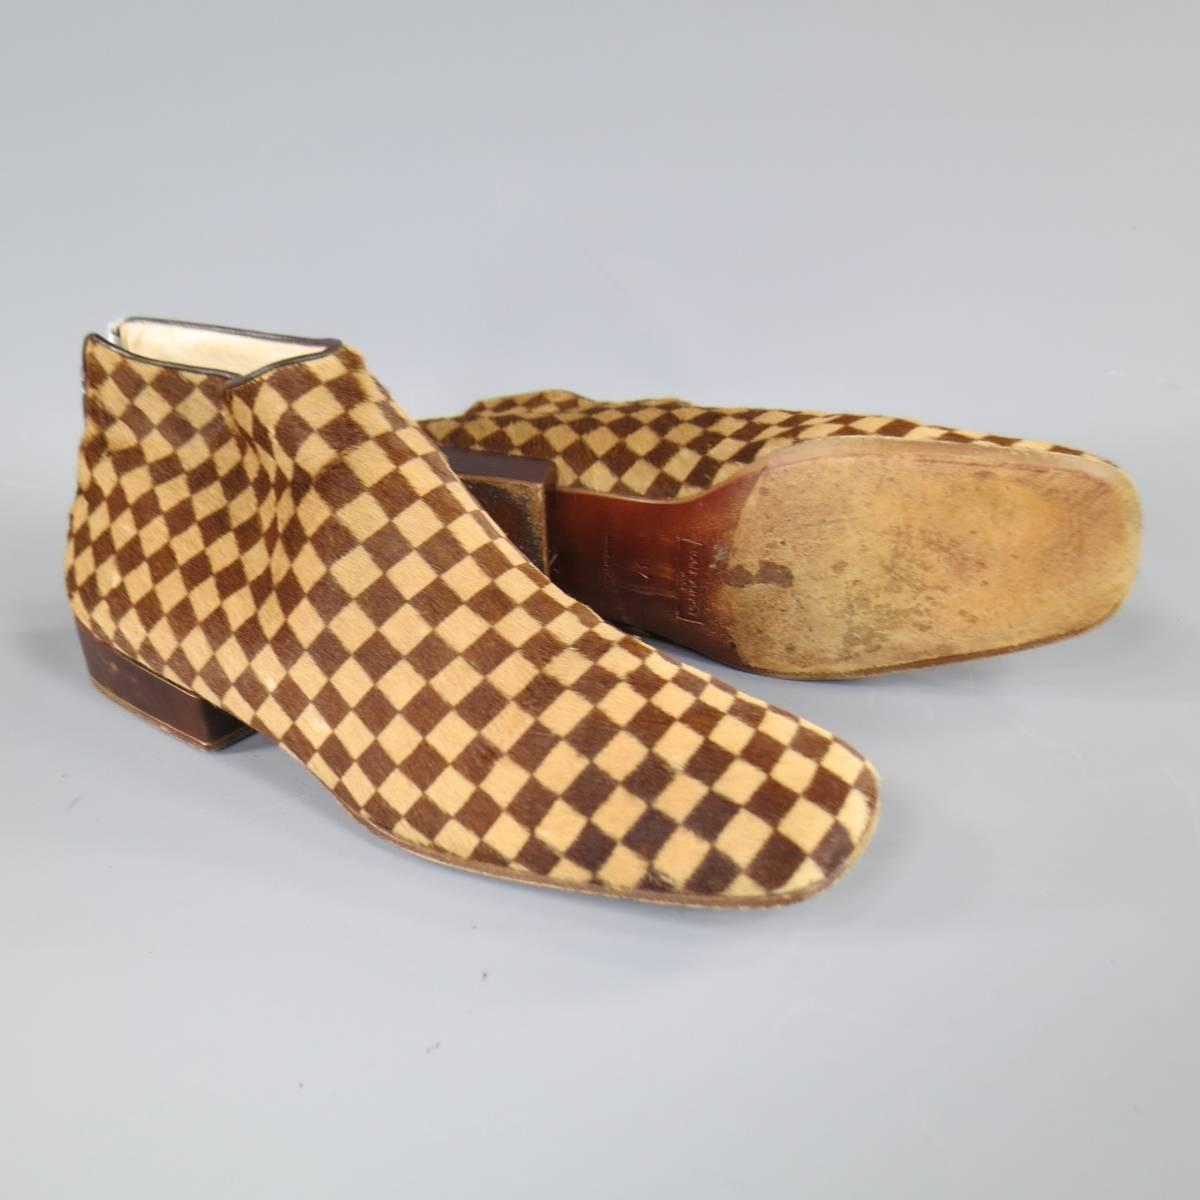 These rare LOUIS VUITTON ankle boots come in beige and brown checkered Damier pony hair with a squared toe back zip, and low chunky heel. Made in Italy.
 
Good Pre-Owned Condition.
Marked: 37
 
Measurements:
 
Length: 10 in.
Width: 3